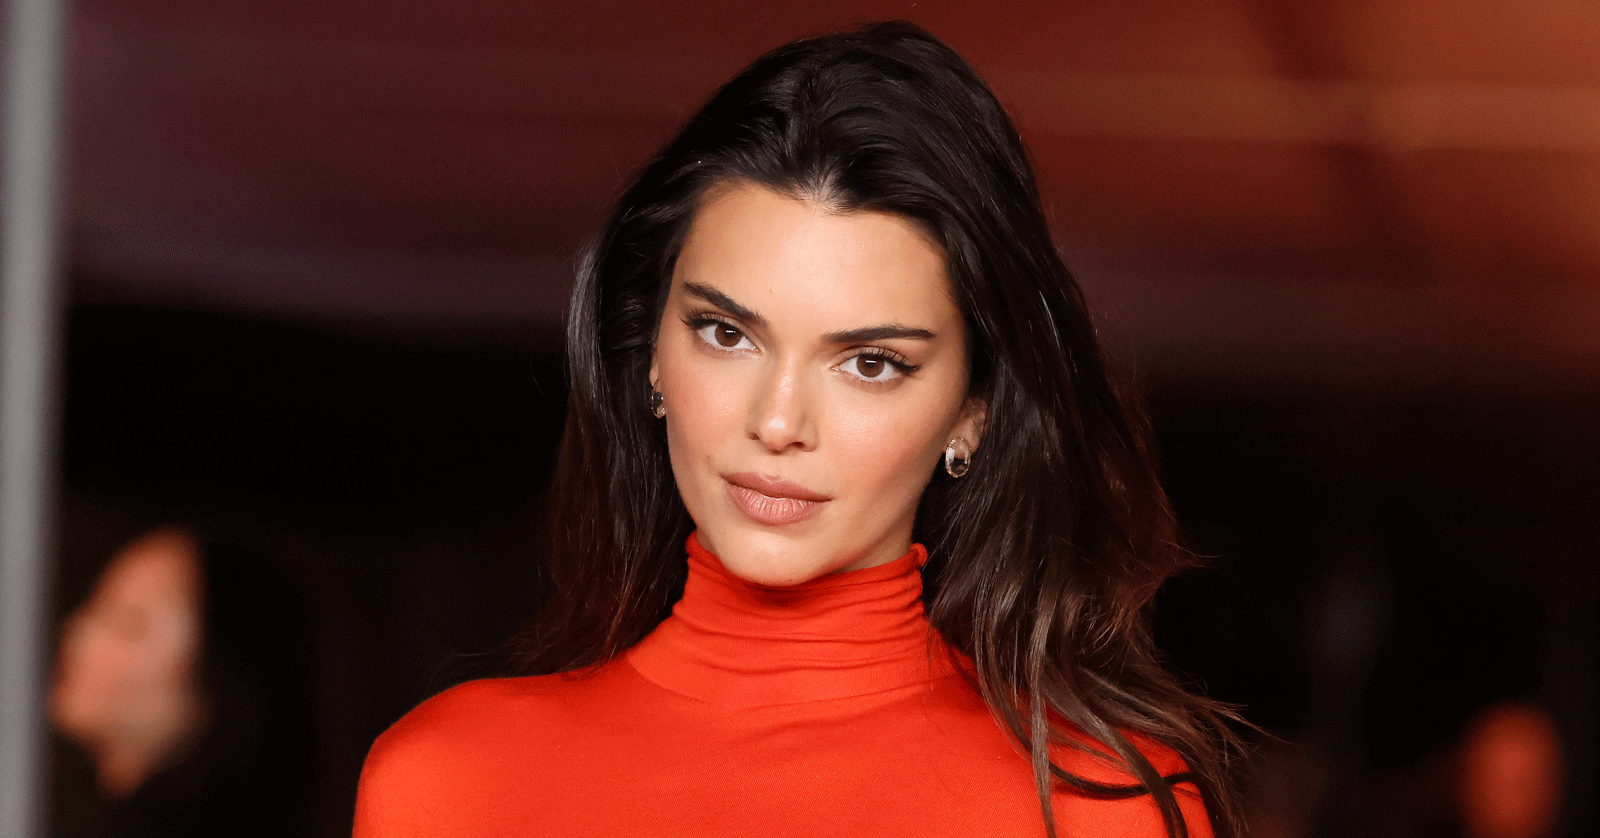 Kendall Jenner’s Sheer Beach Dress Is About to Go Viral